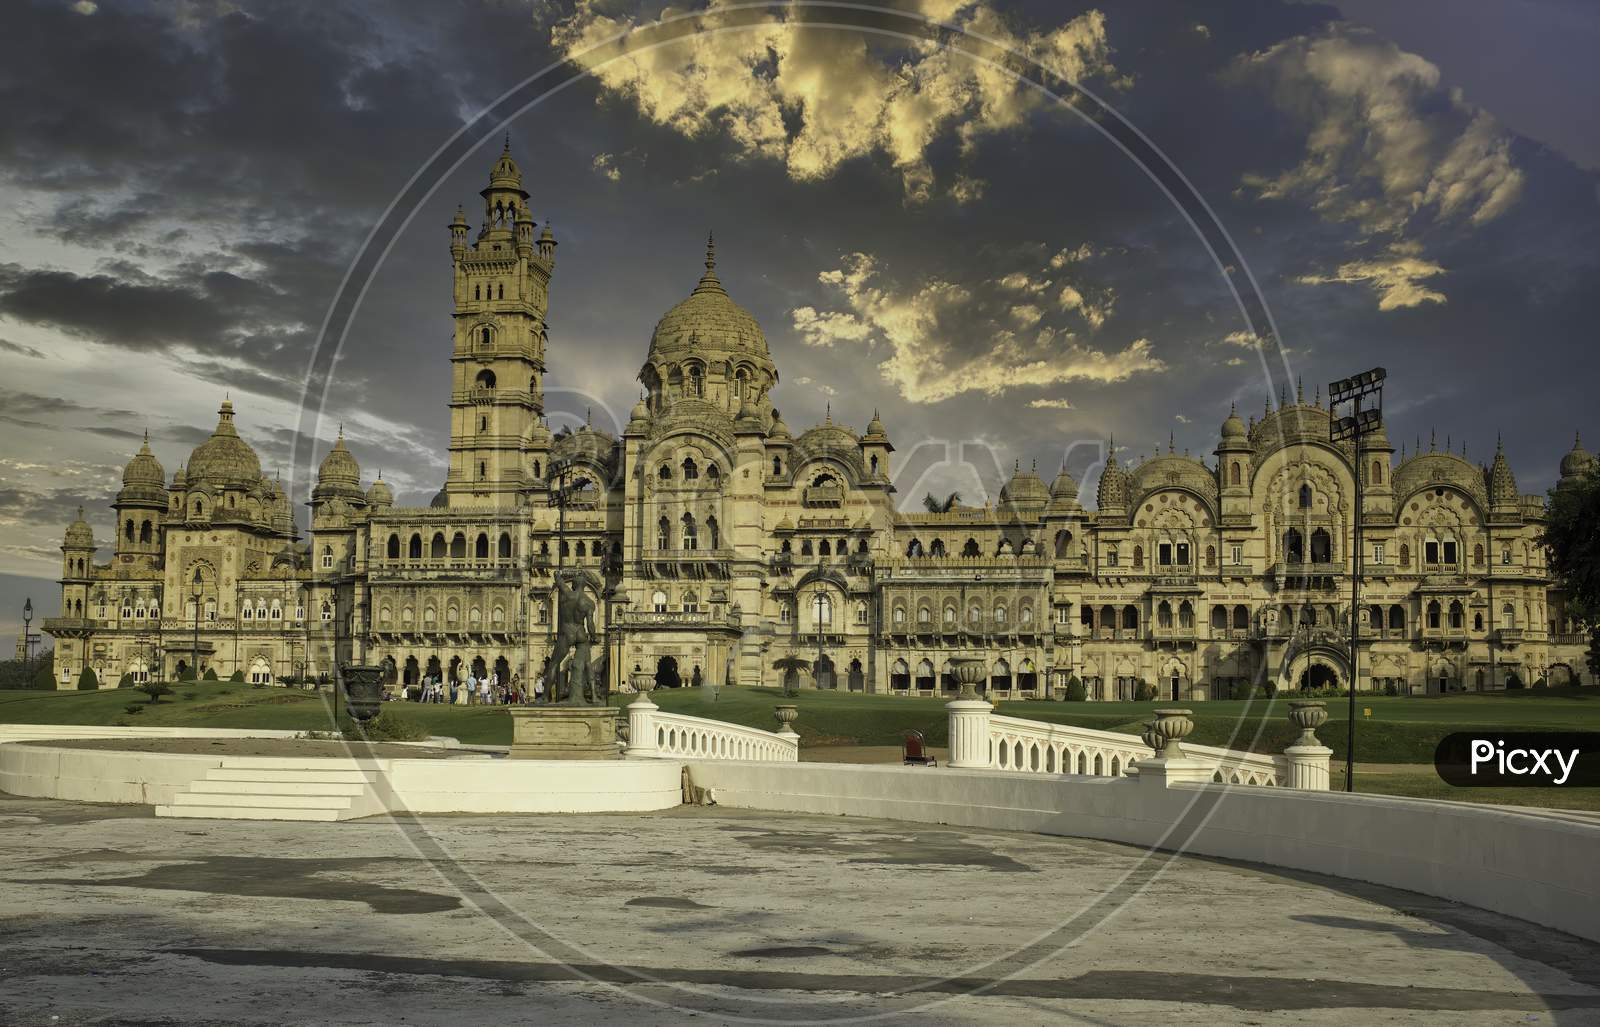 Vadodara, India - November 16, 2012: Front View Of The Lakshmi Vilas Palace In The State Of Gujarat, Was Constructed By The Gaekwad Maratha Family, Who Ruled The Baroda State